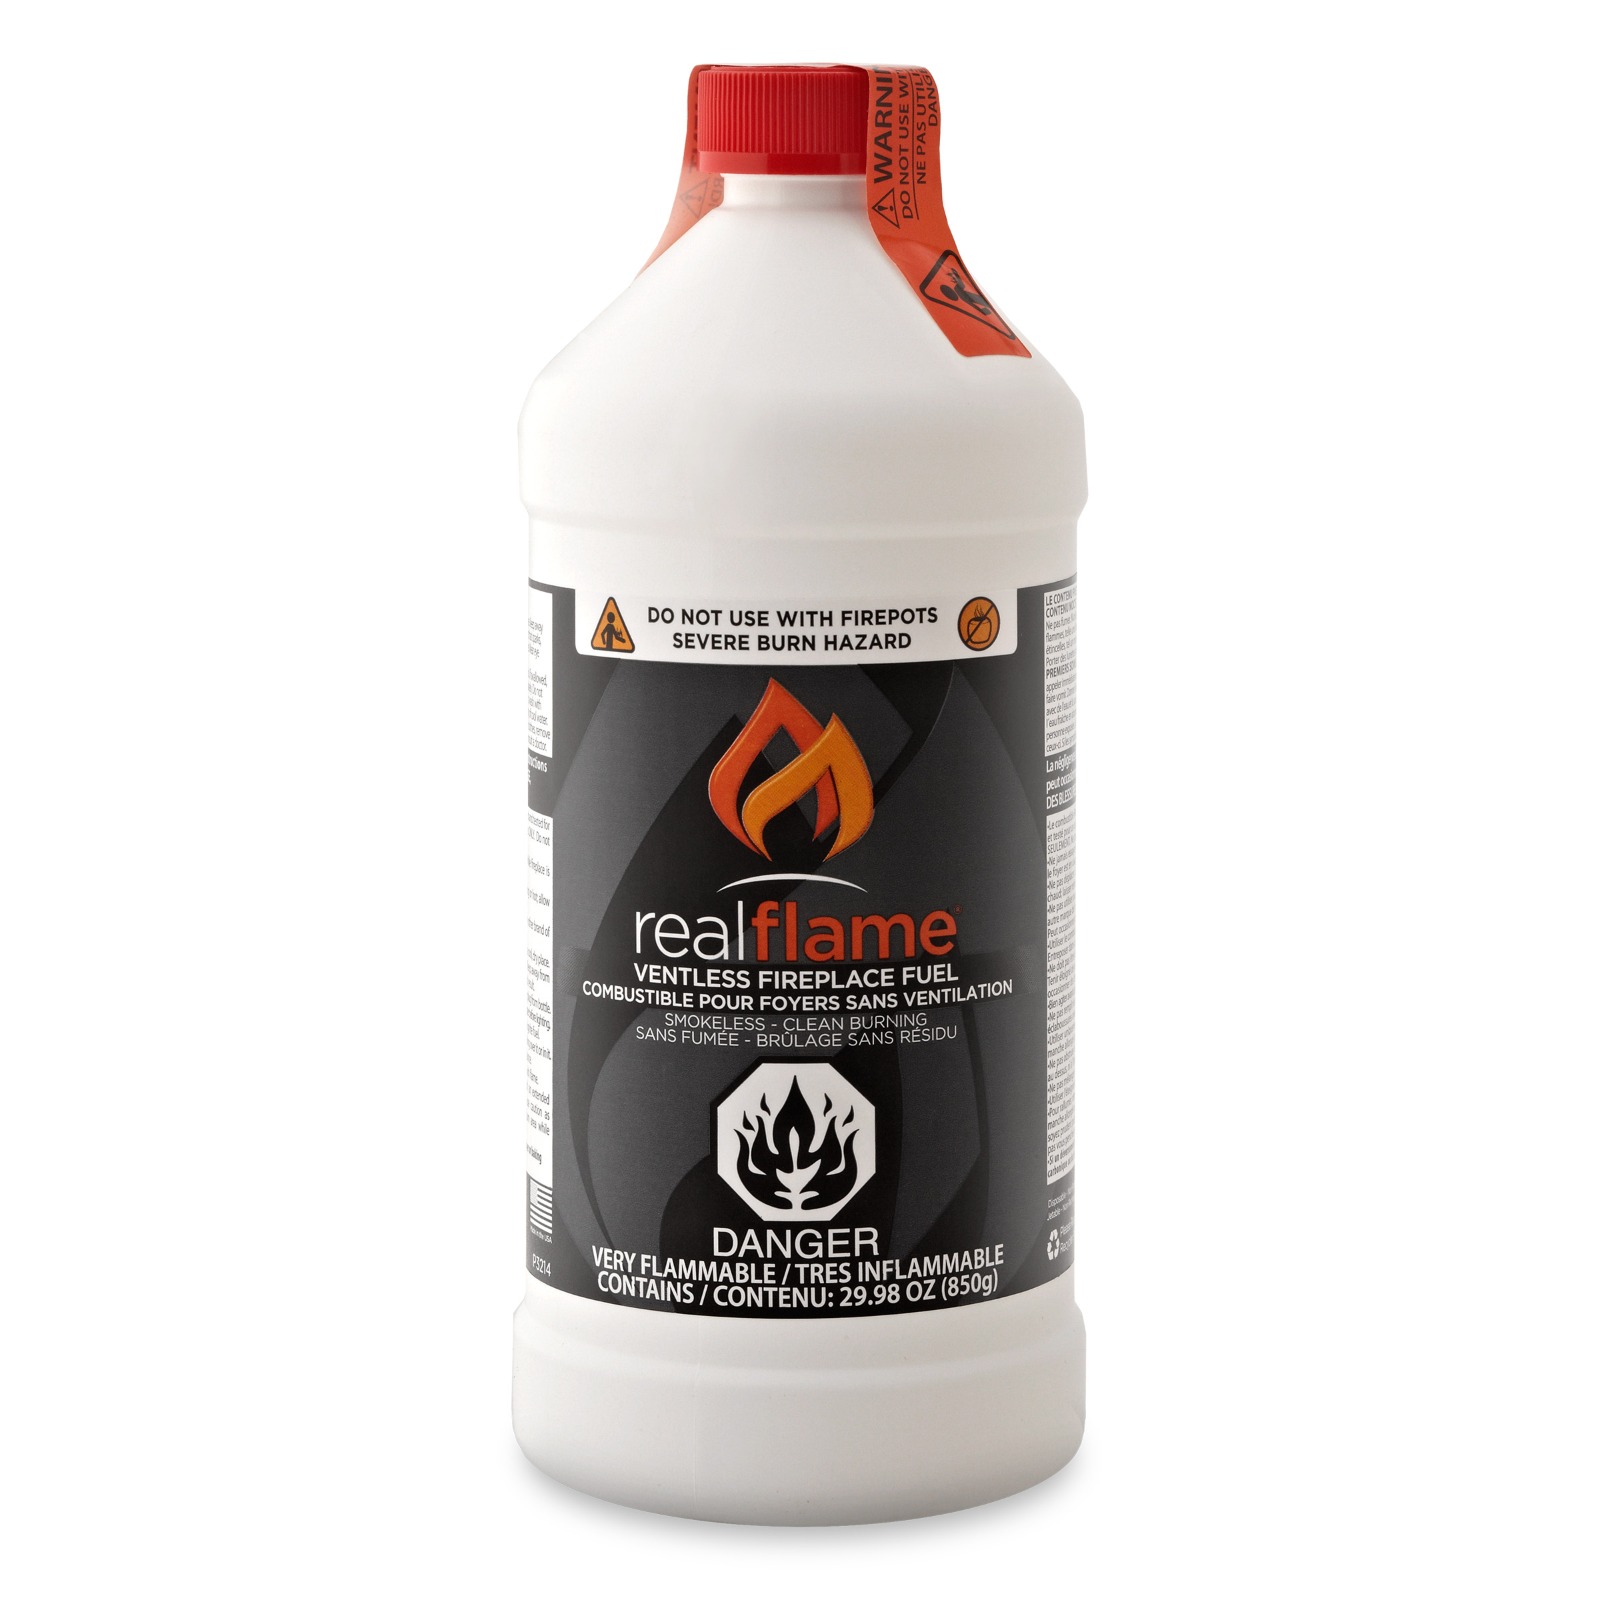 Bottle of Real Flame Ventless Fuel.